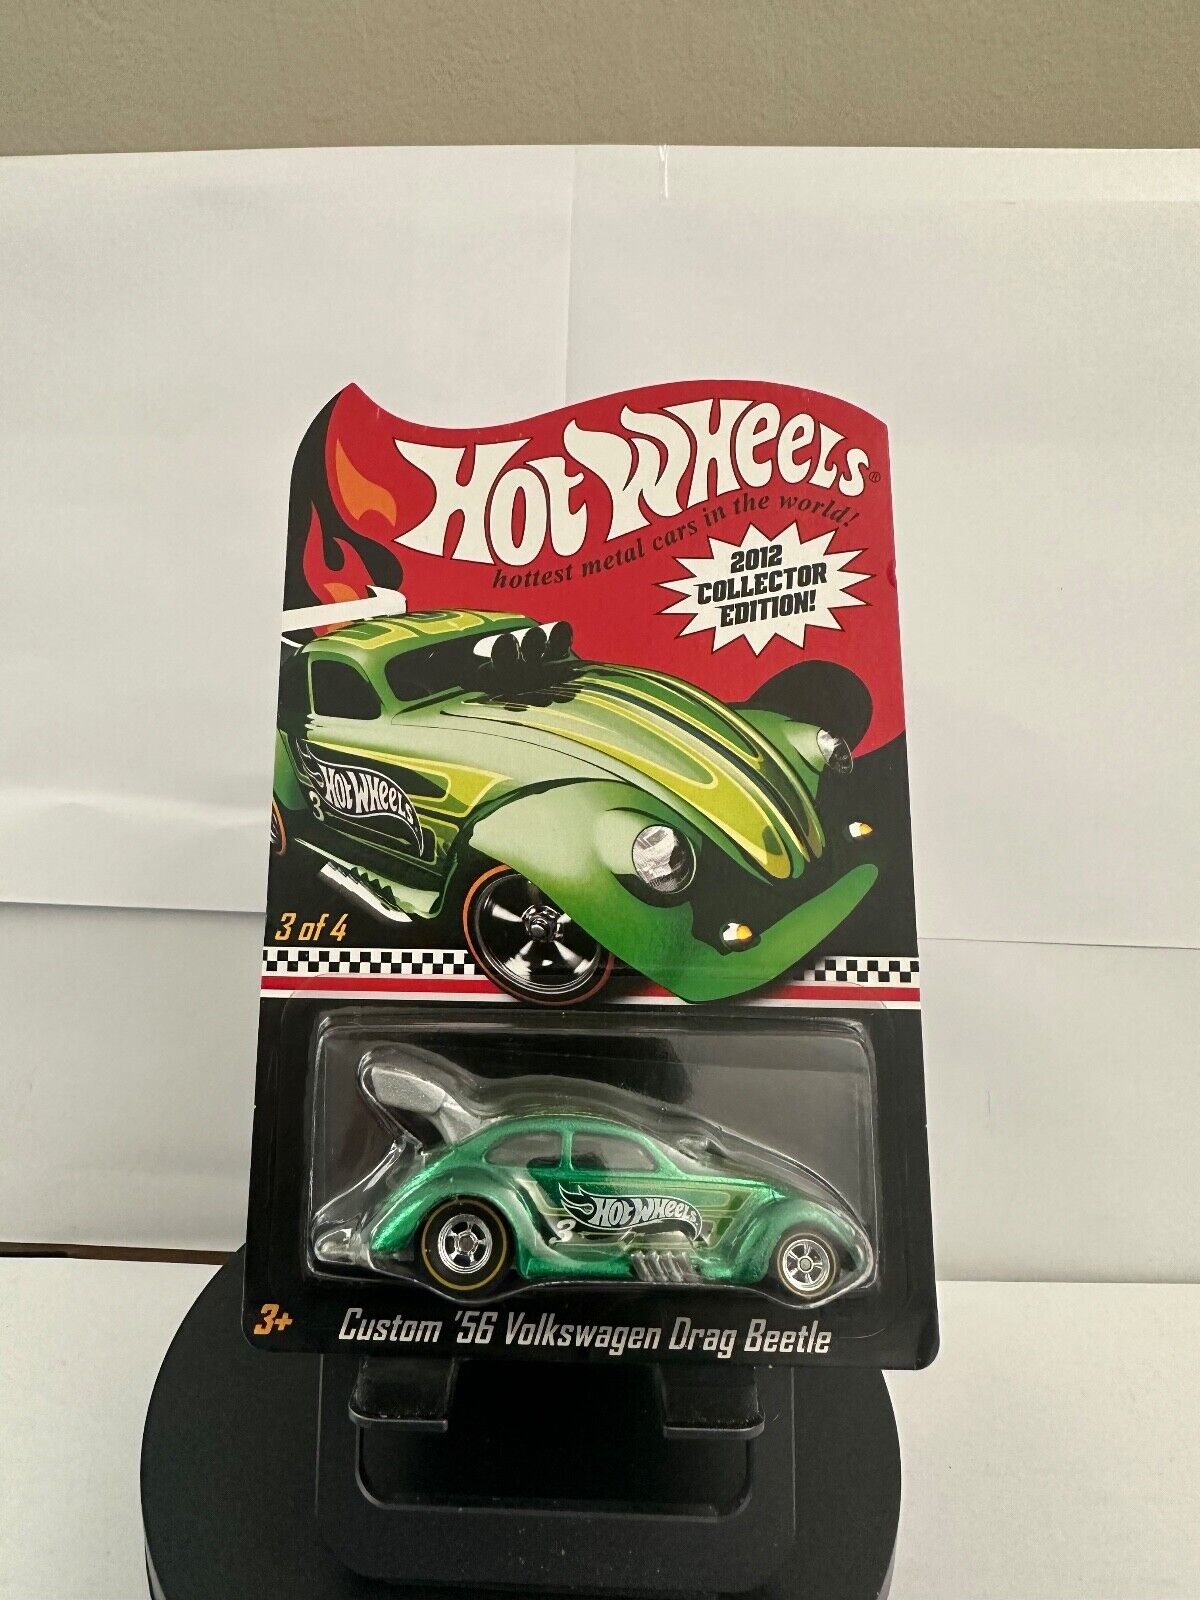 Hot Wheels 2012 Collector Edition Custom '56 Volkswagen Drag Beetle Mail-in  L62